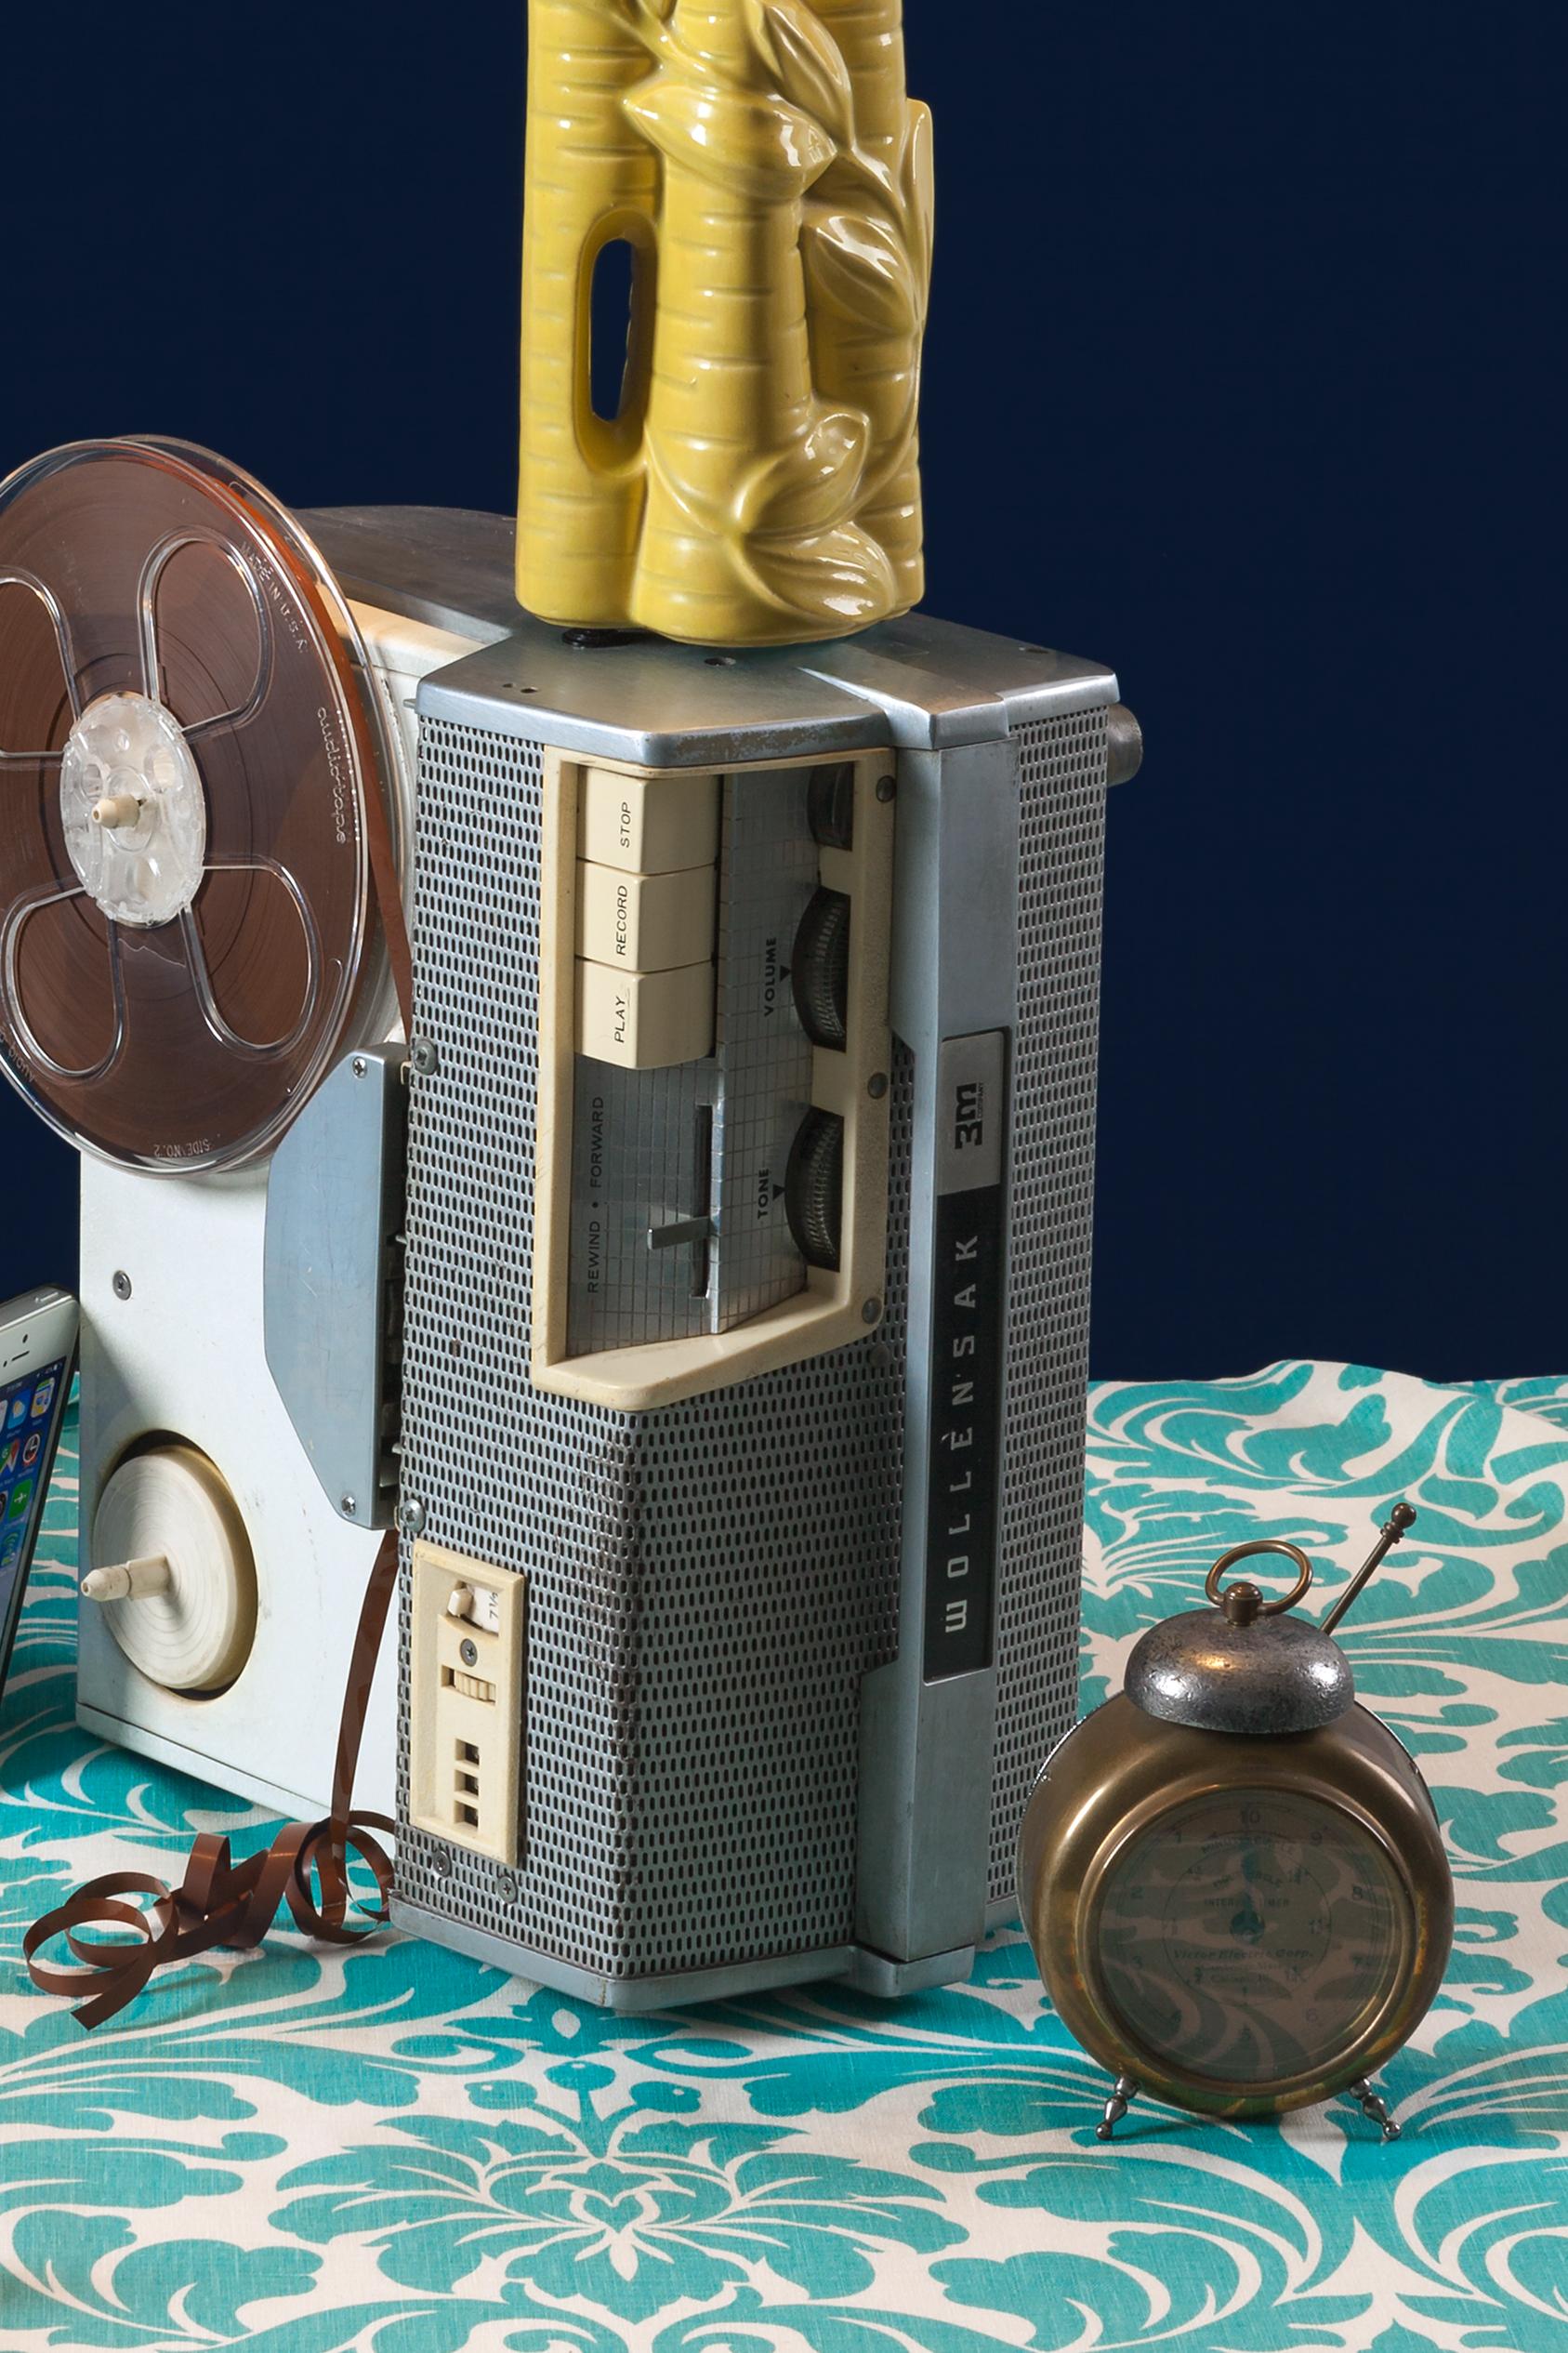 “Reel to Reel,” from my “Tech Vanitas” photography series, embraces our love for beautifully designed, vintage items and anxiety over new technology. My still lifes clearly reference 17th Century Dutch vanitas paintings and their air of craft